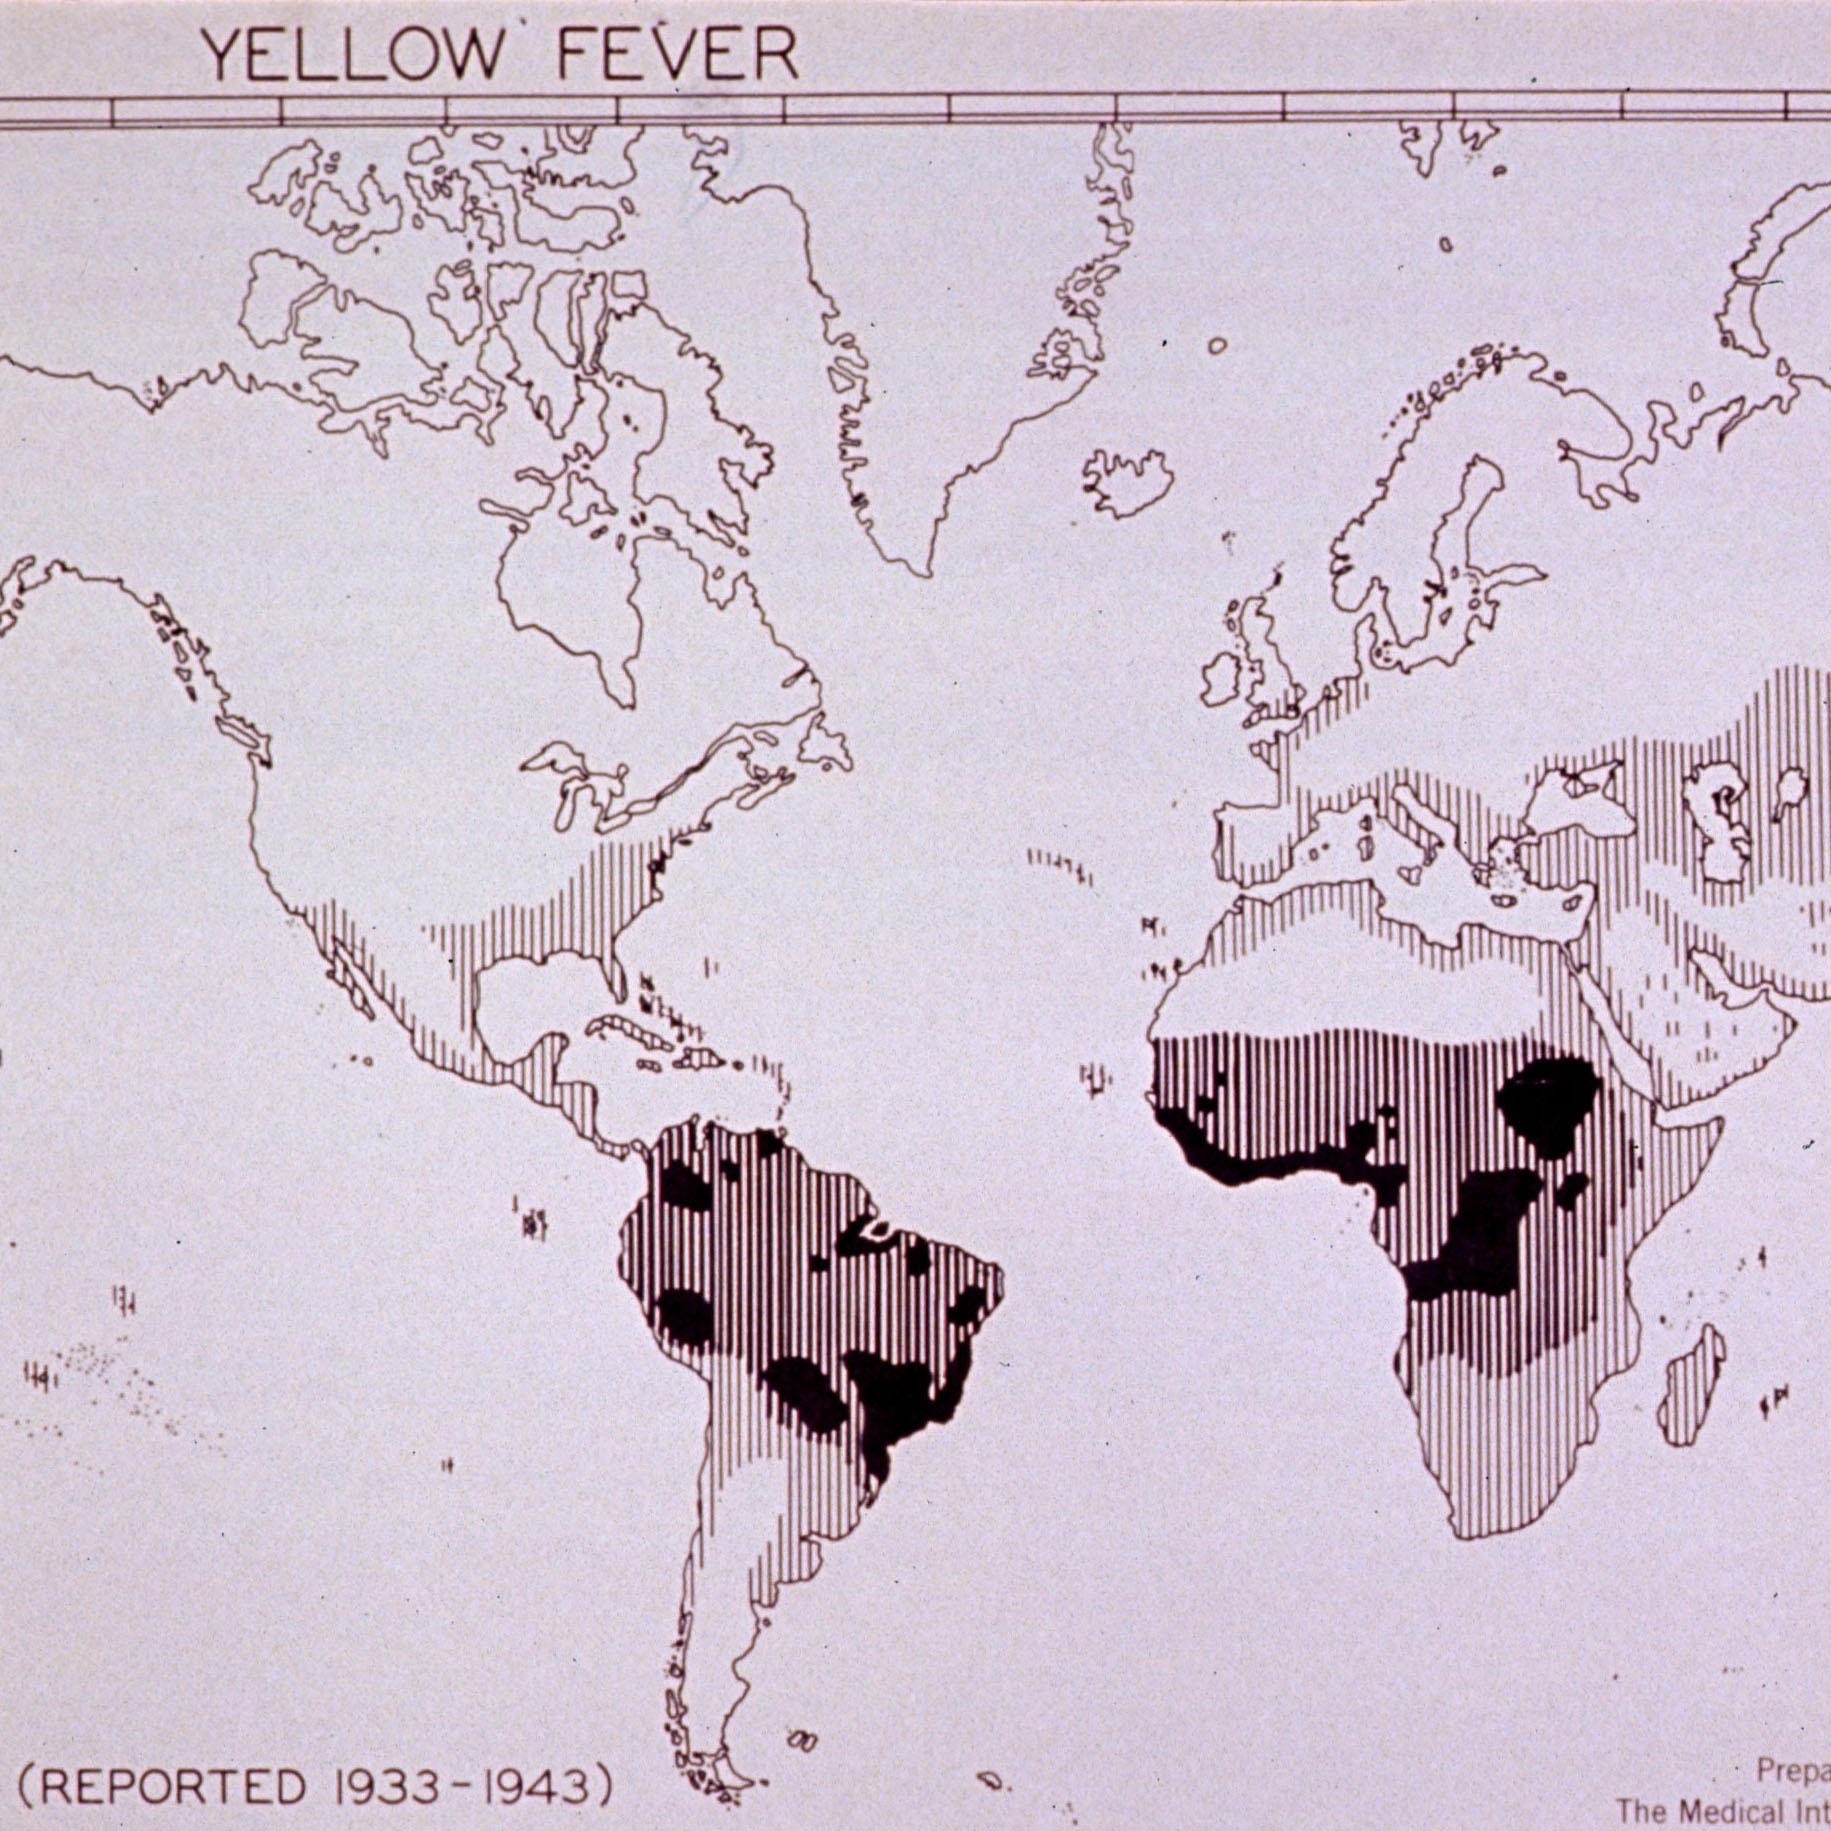 Map depicting locations of Yellow Fever, Mainly in the southern hemisphere, concentrated in Africa and South America